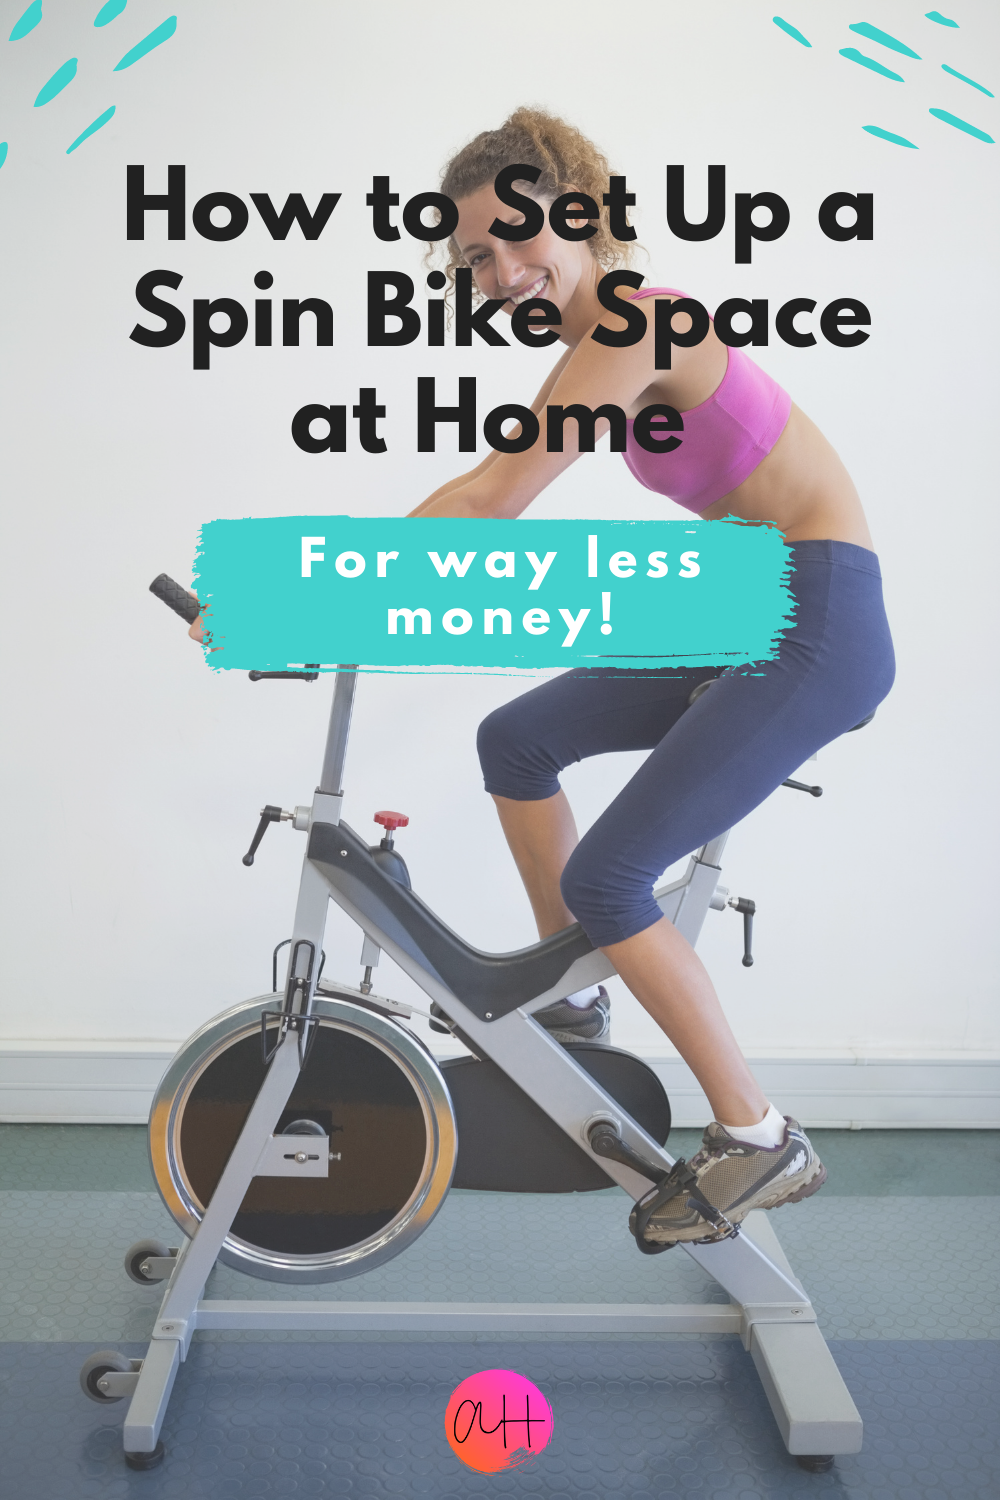 How to Set Up a Spin Bike Space at Home